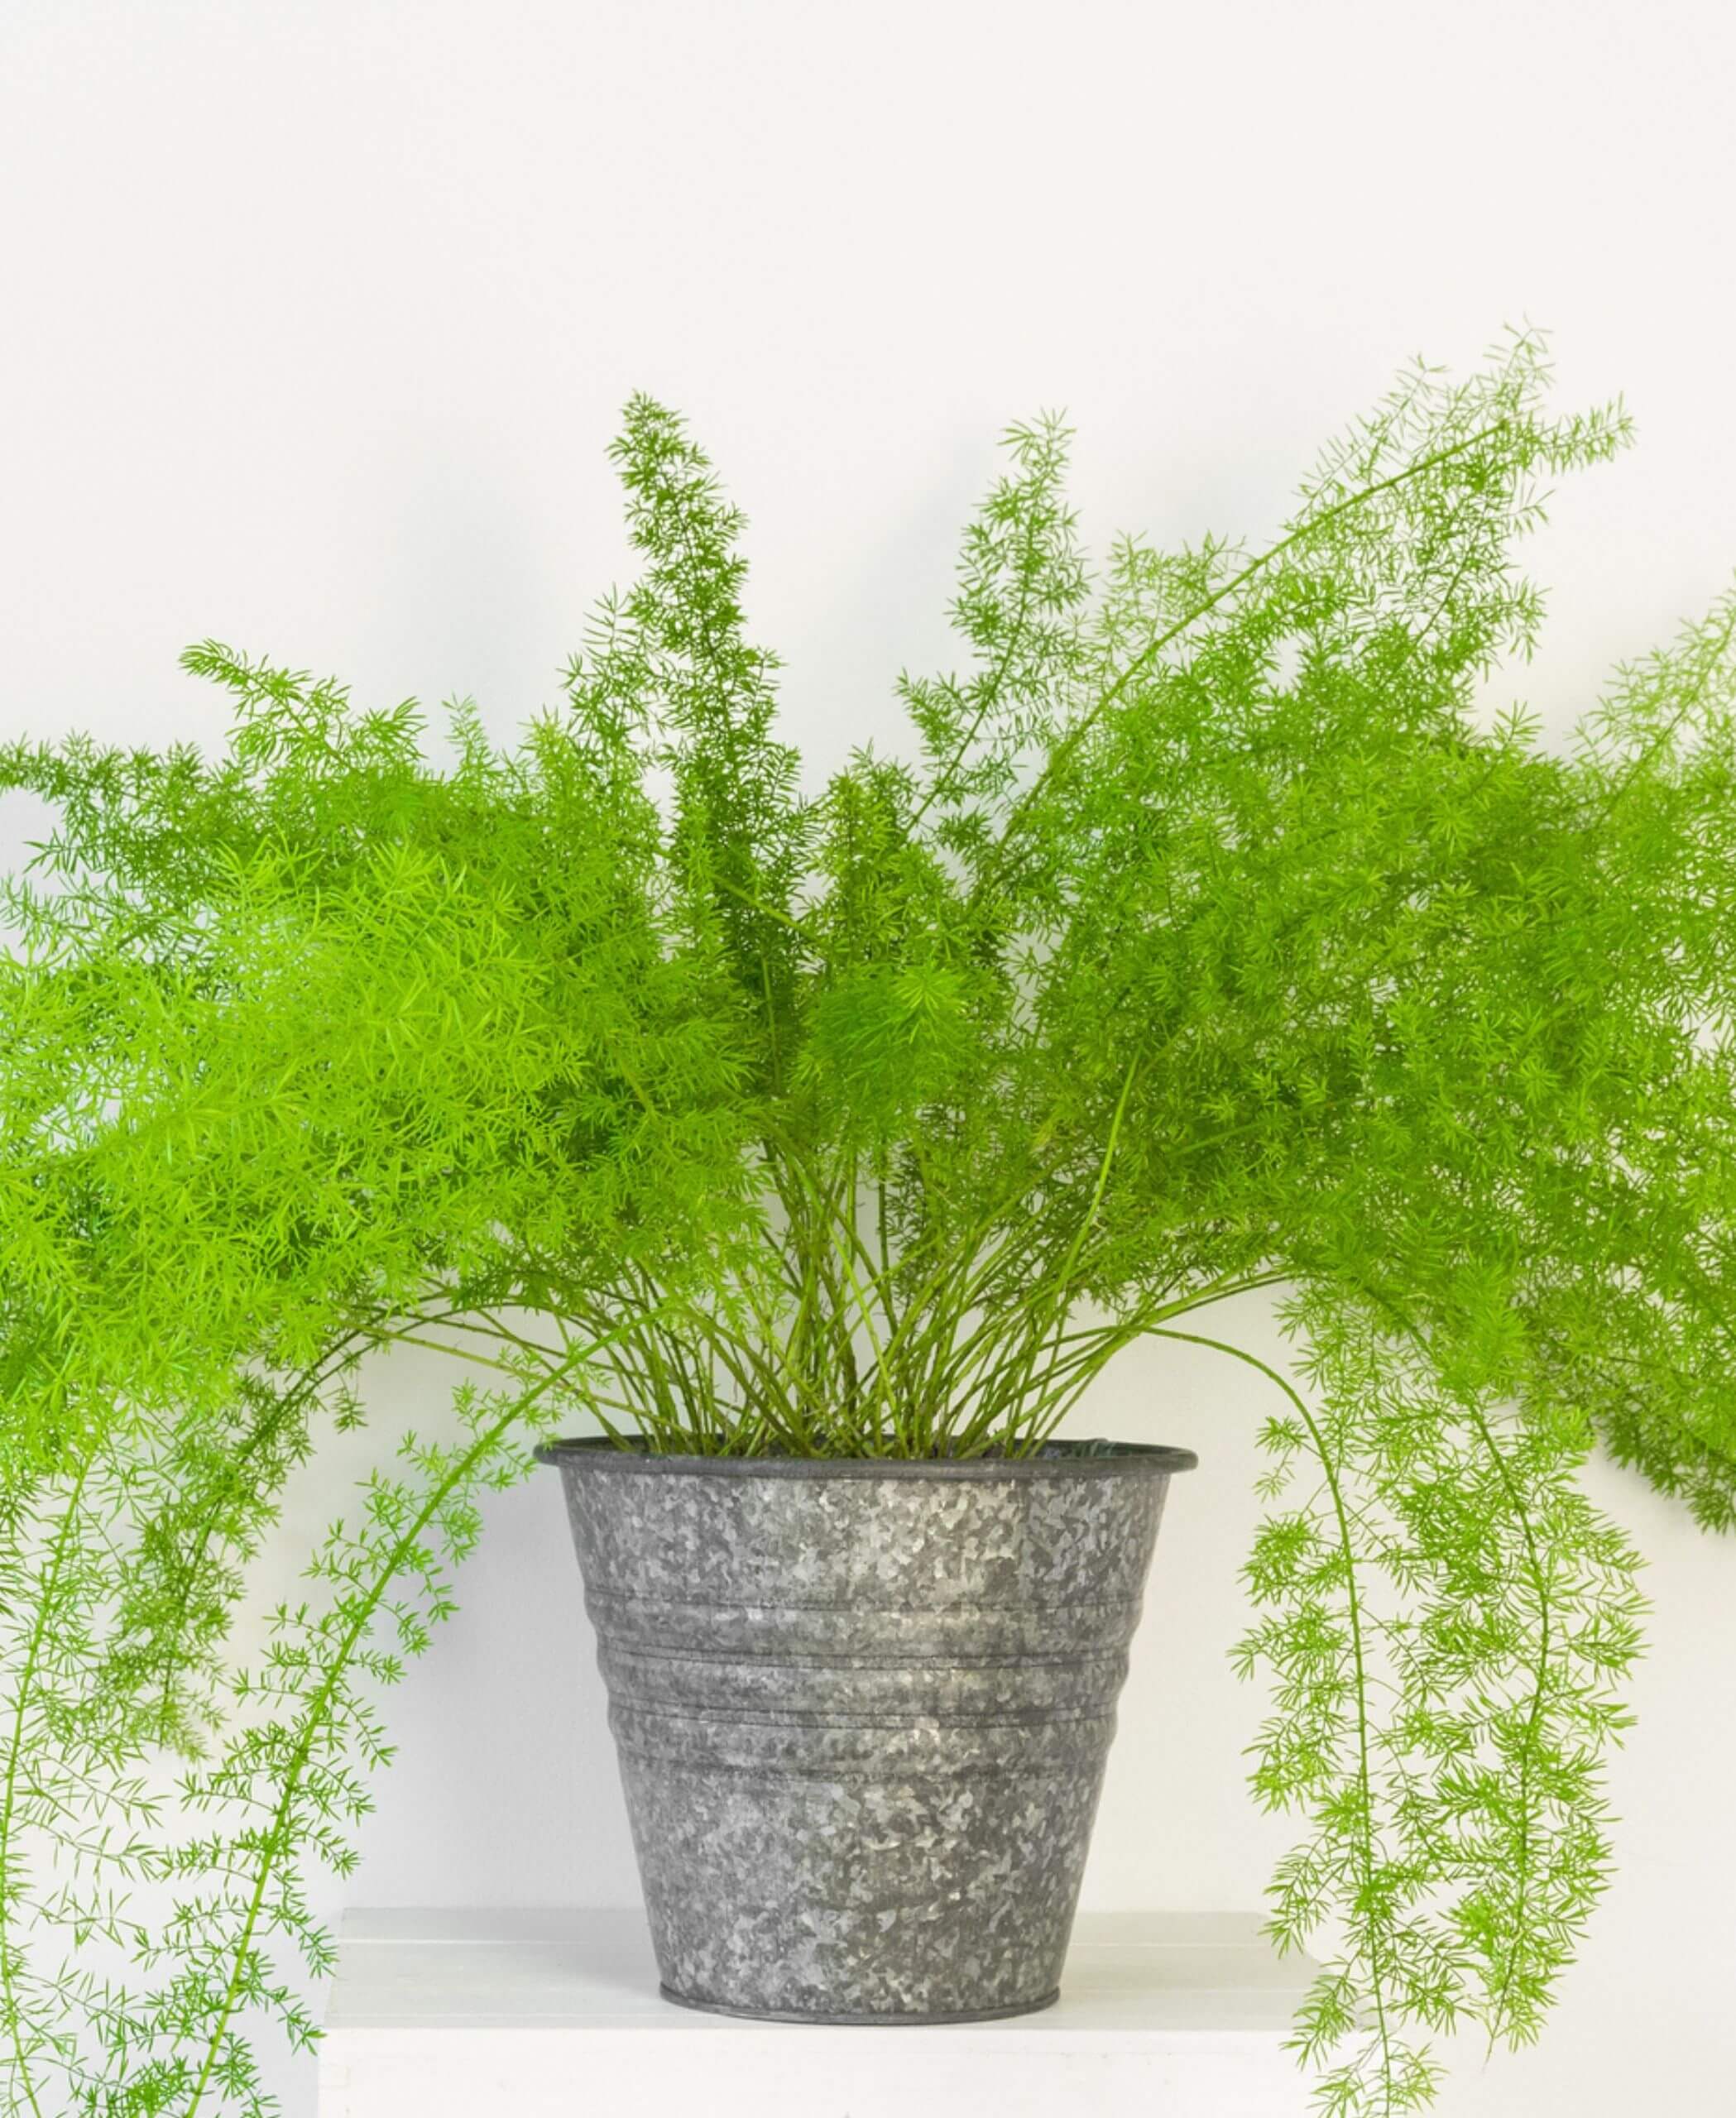 Why is my Asparagus Fern turning yellow?